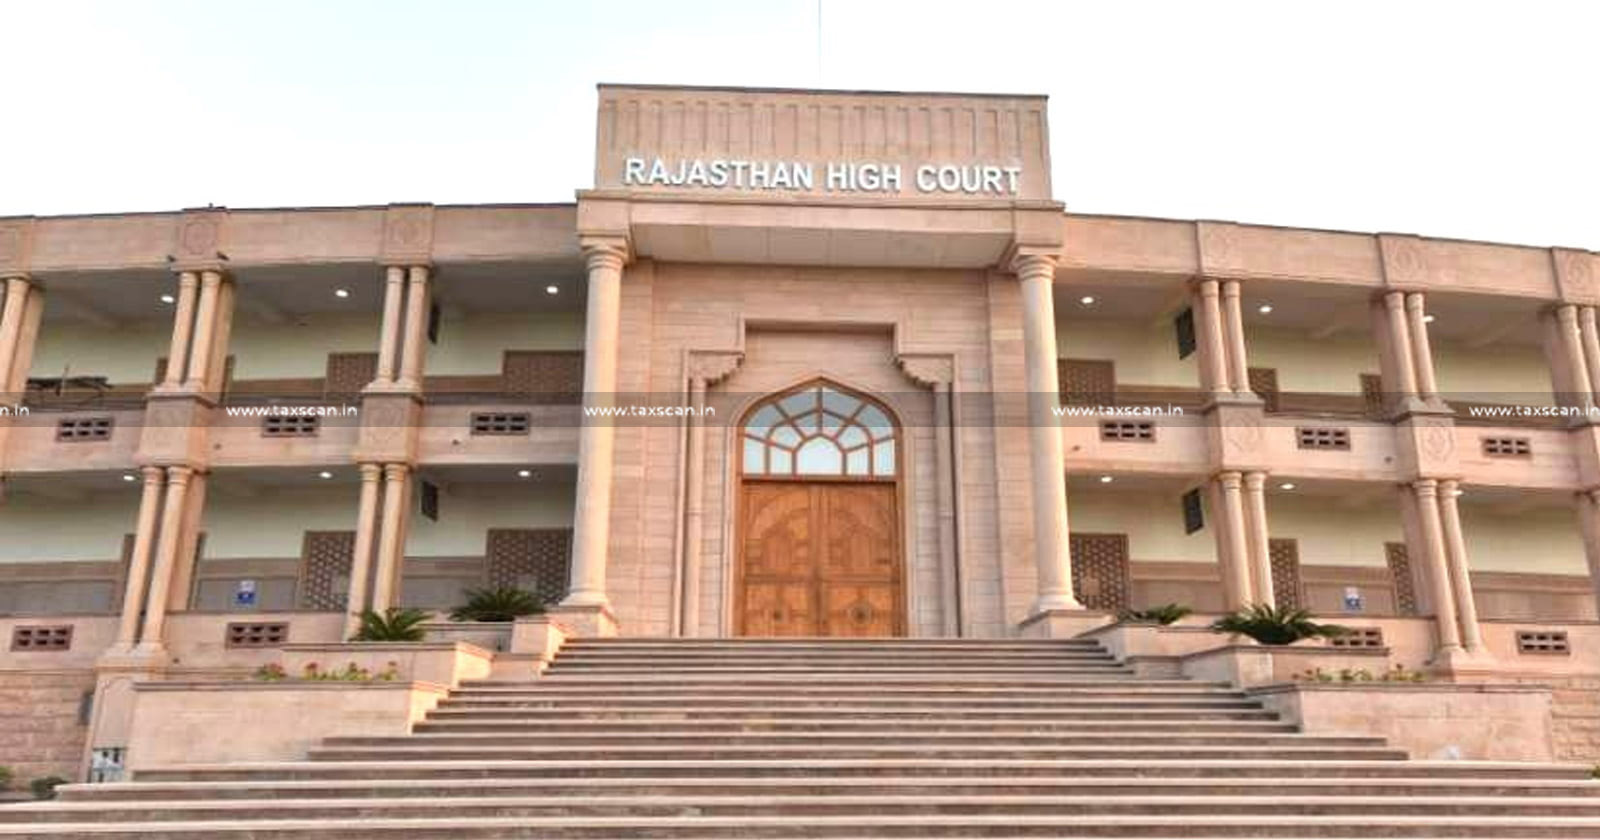 Rajasthan HC - rajasthan high court - Income Tax - scn - show cause notice - Time Barred Issuance - Taxscan